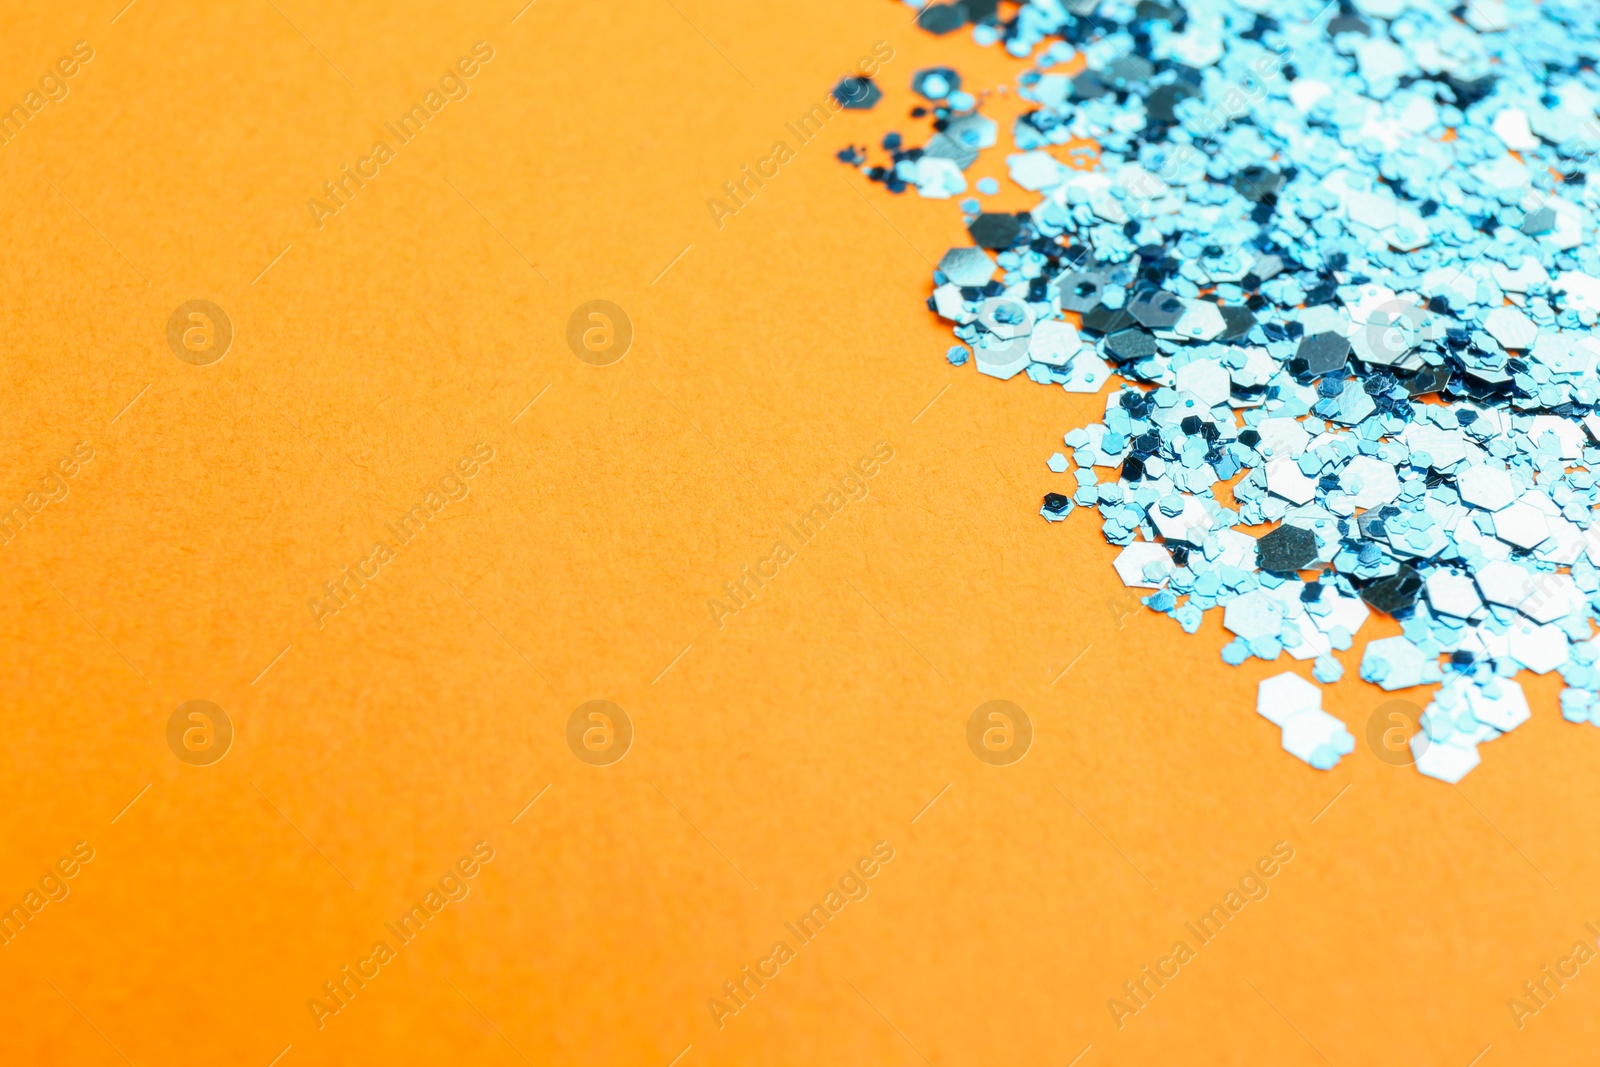 Photo of Shiny bright light blue glitter on pale orange background, closeup. Space for text